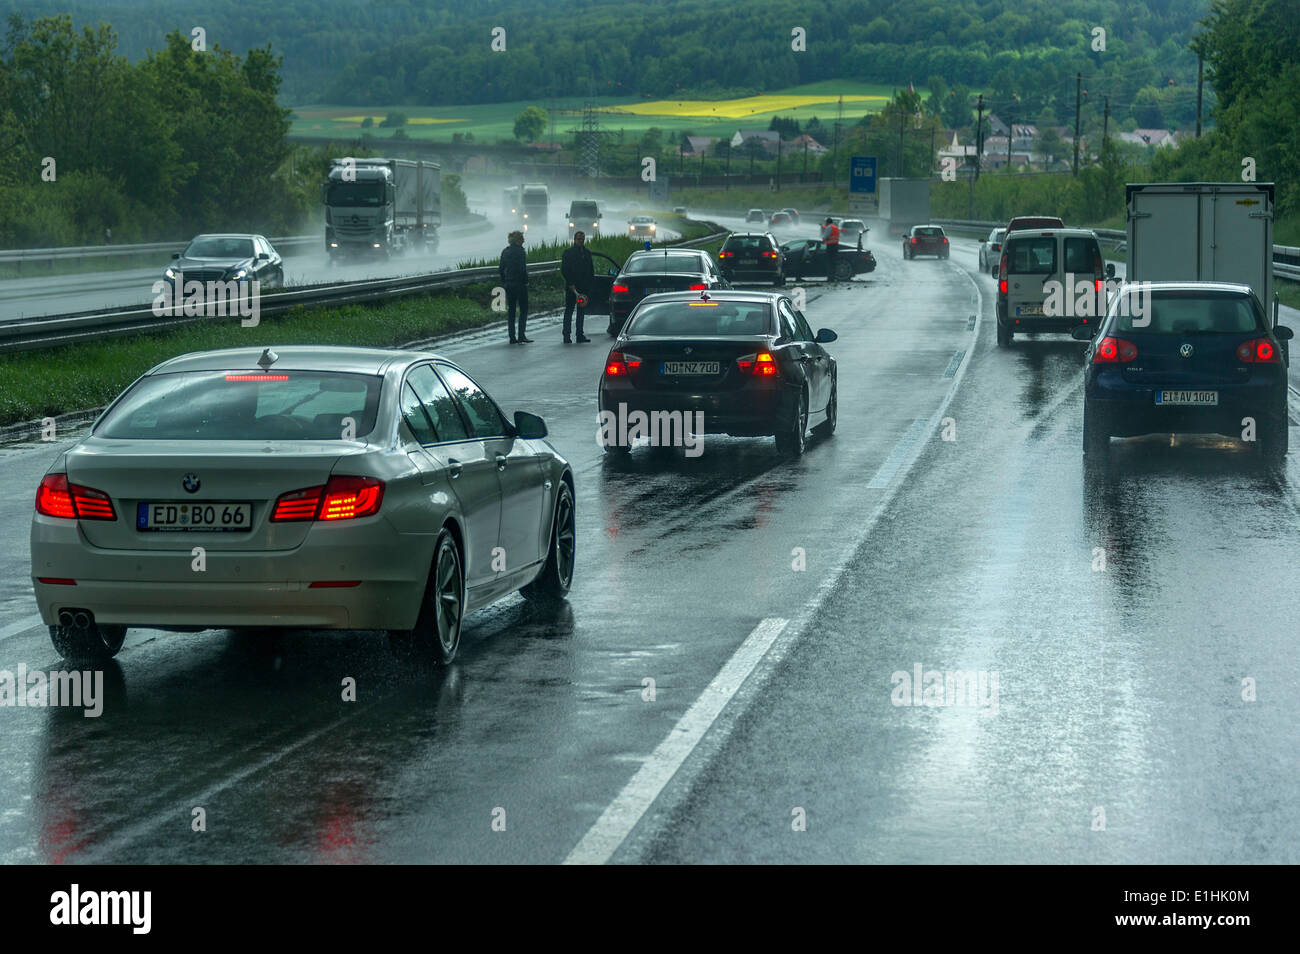 Accident during heavy rain with poor visibility, vehicles diverting to avoid an accident, A9 motorway, near Thalmässing Stock Photo